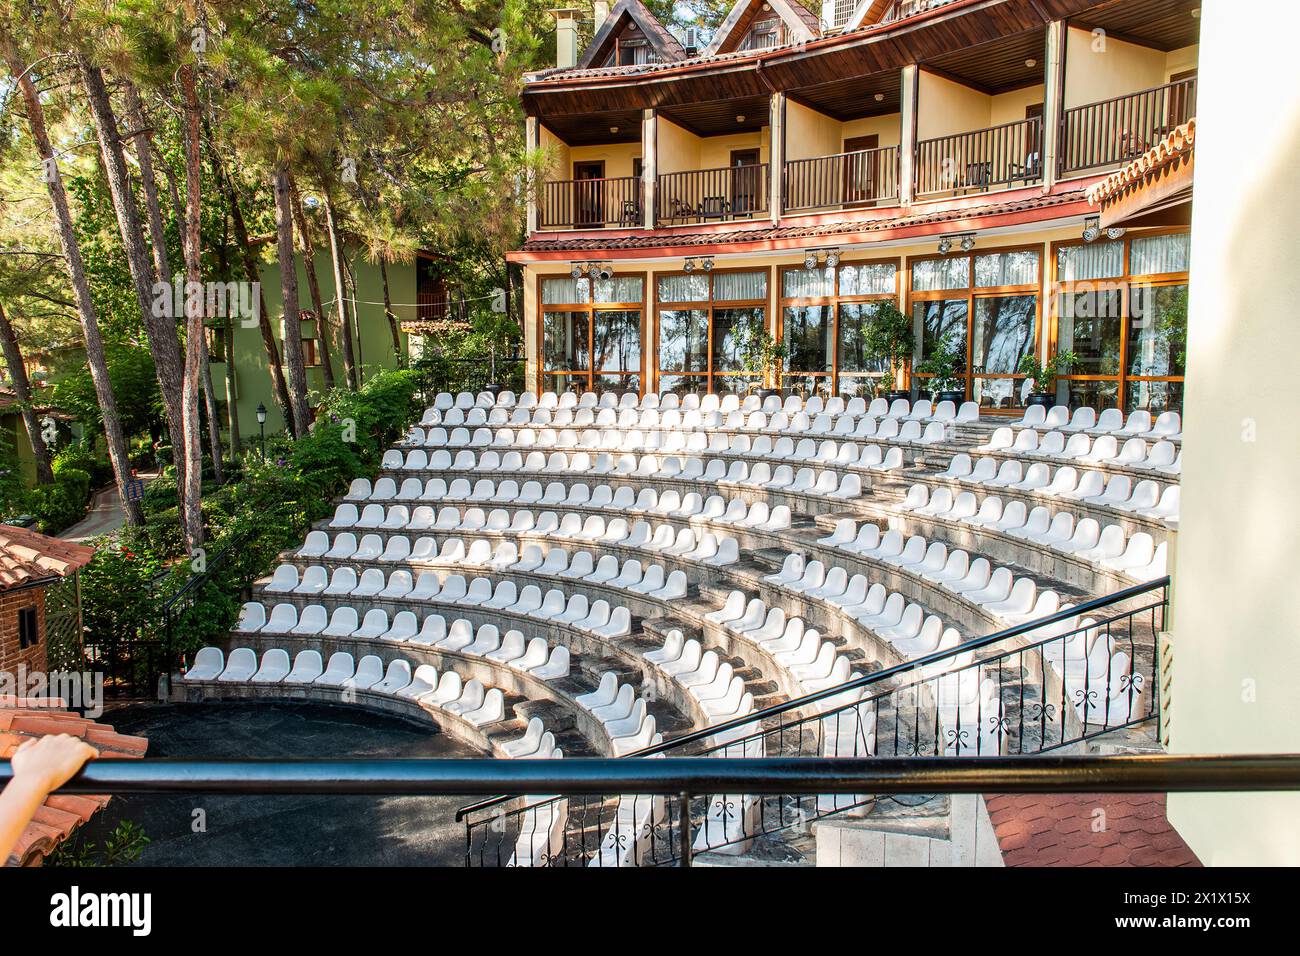 Open-air amphitheater for evening performances at a coastal hotel, surrounded by lush vegetation and tall pine trees Stock Photo